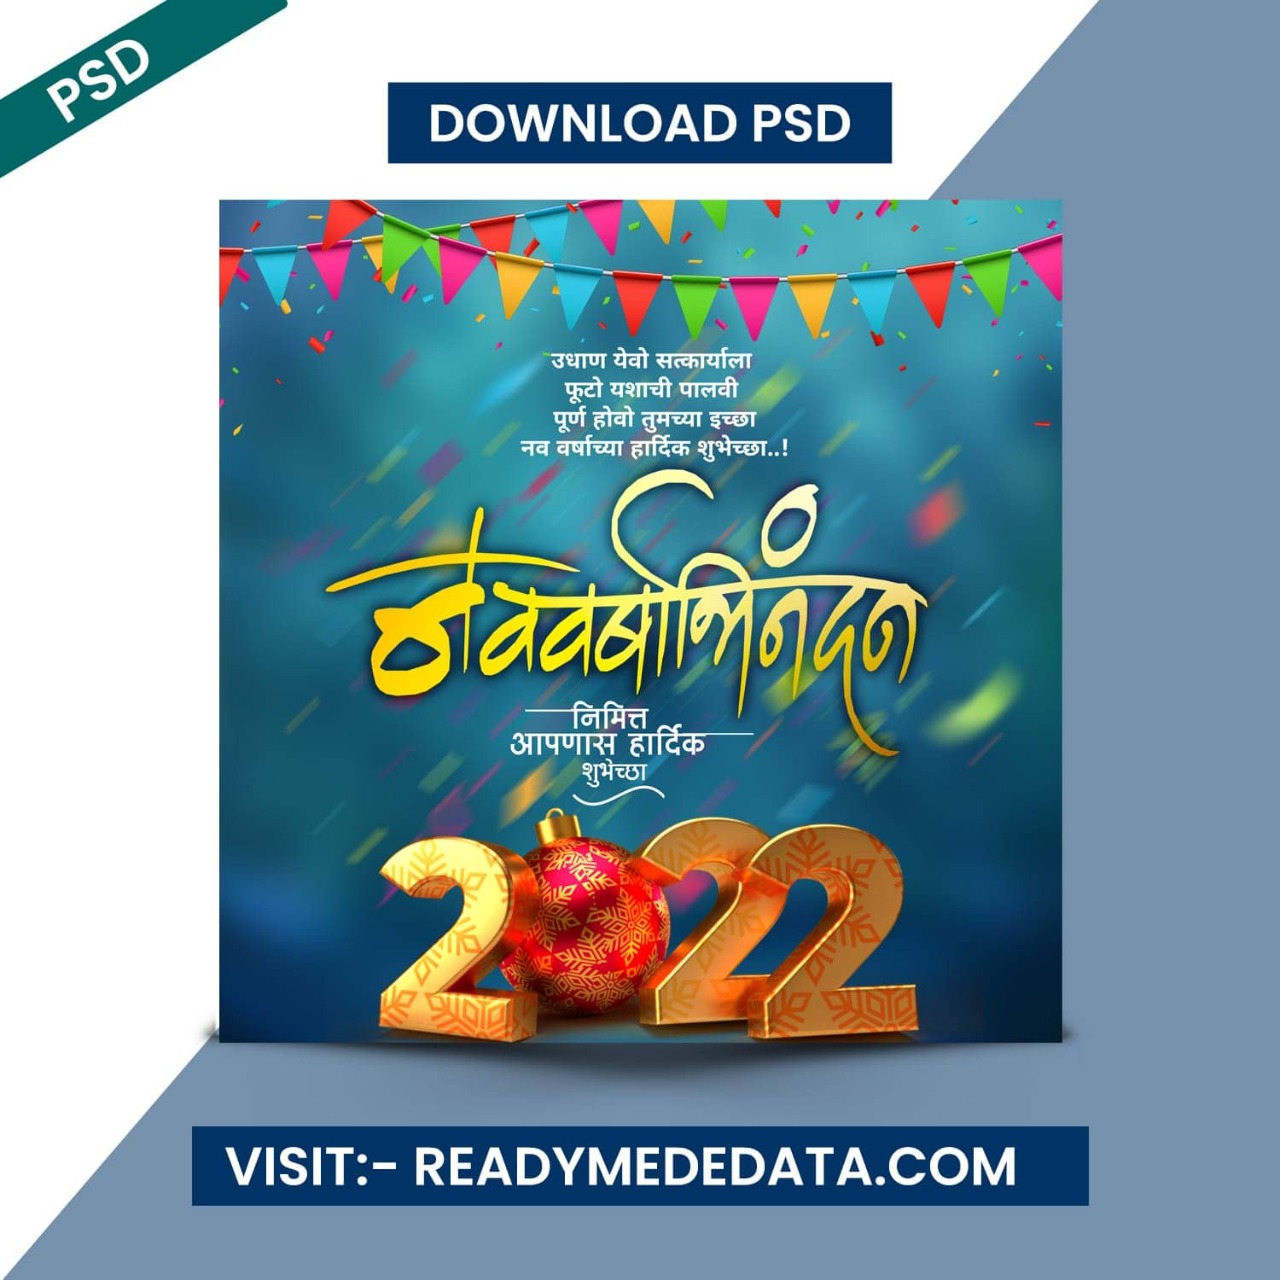 New Year Psd